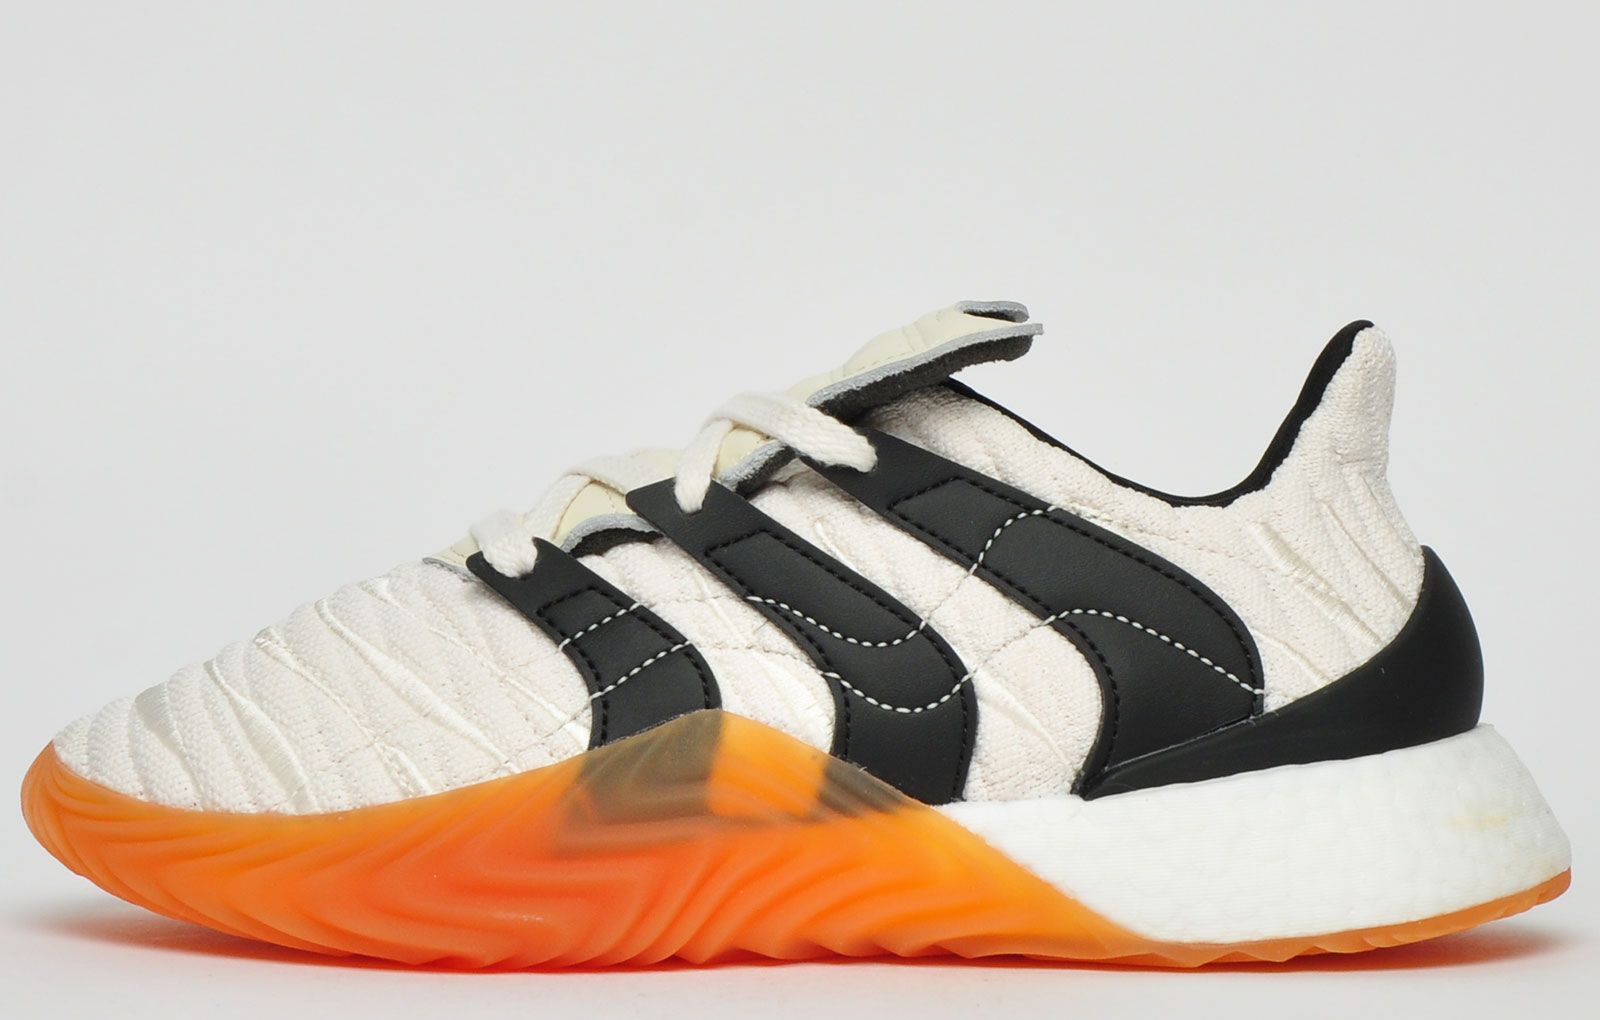 <p>Inspired by the passion of football, Adidas have given the Predator-inspired Sobakov an update, introducing an exclusive Boost midsole, along with a new Accelerator-styled look.</p> <p>Featuring the same rippled upper in a textured knit with designer stitch detailing as well as the famous three stripe branding in a curve design with an on trend wave styled outsole for a standout design with an additional heel cup featuring around the ankle for added support</p> <p class=